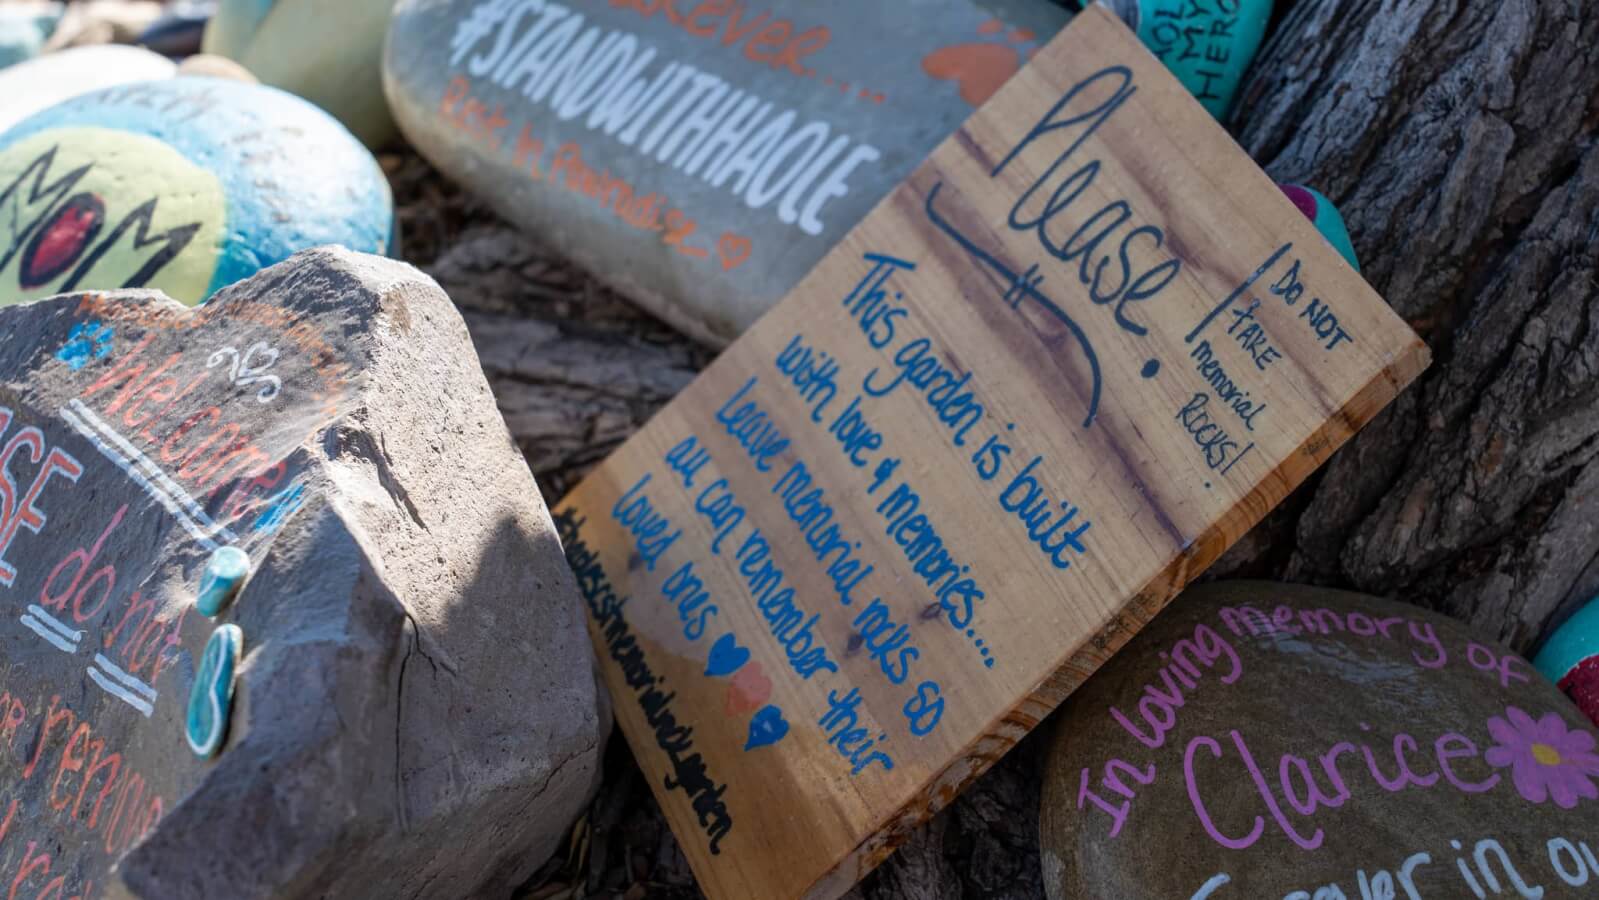 Haole’s Rock Garden in Ventura Tells a Story of Everything Right